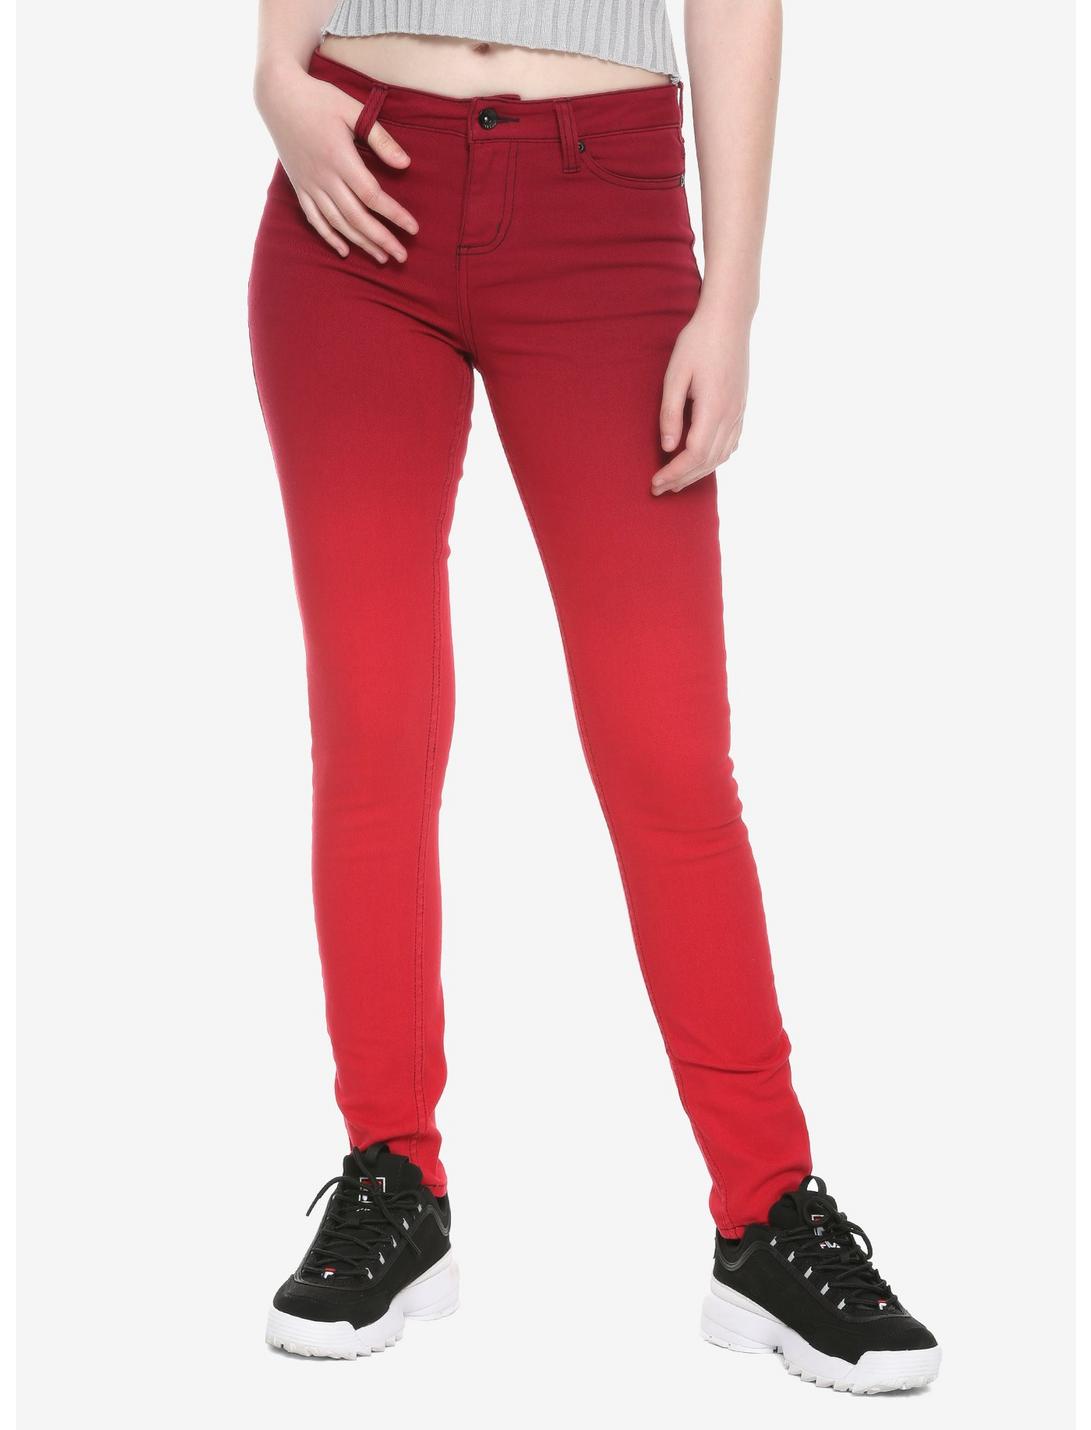 HT Denim Red Ombre Low-Rise Skinny Jeans, RED, hi-res